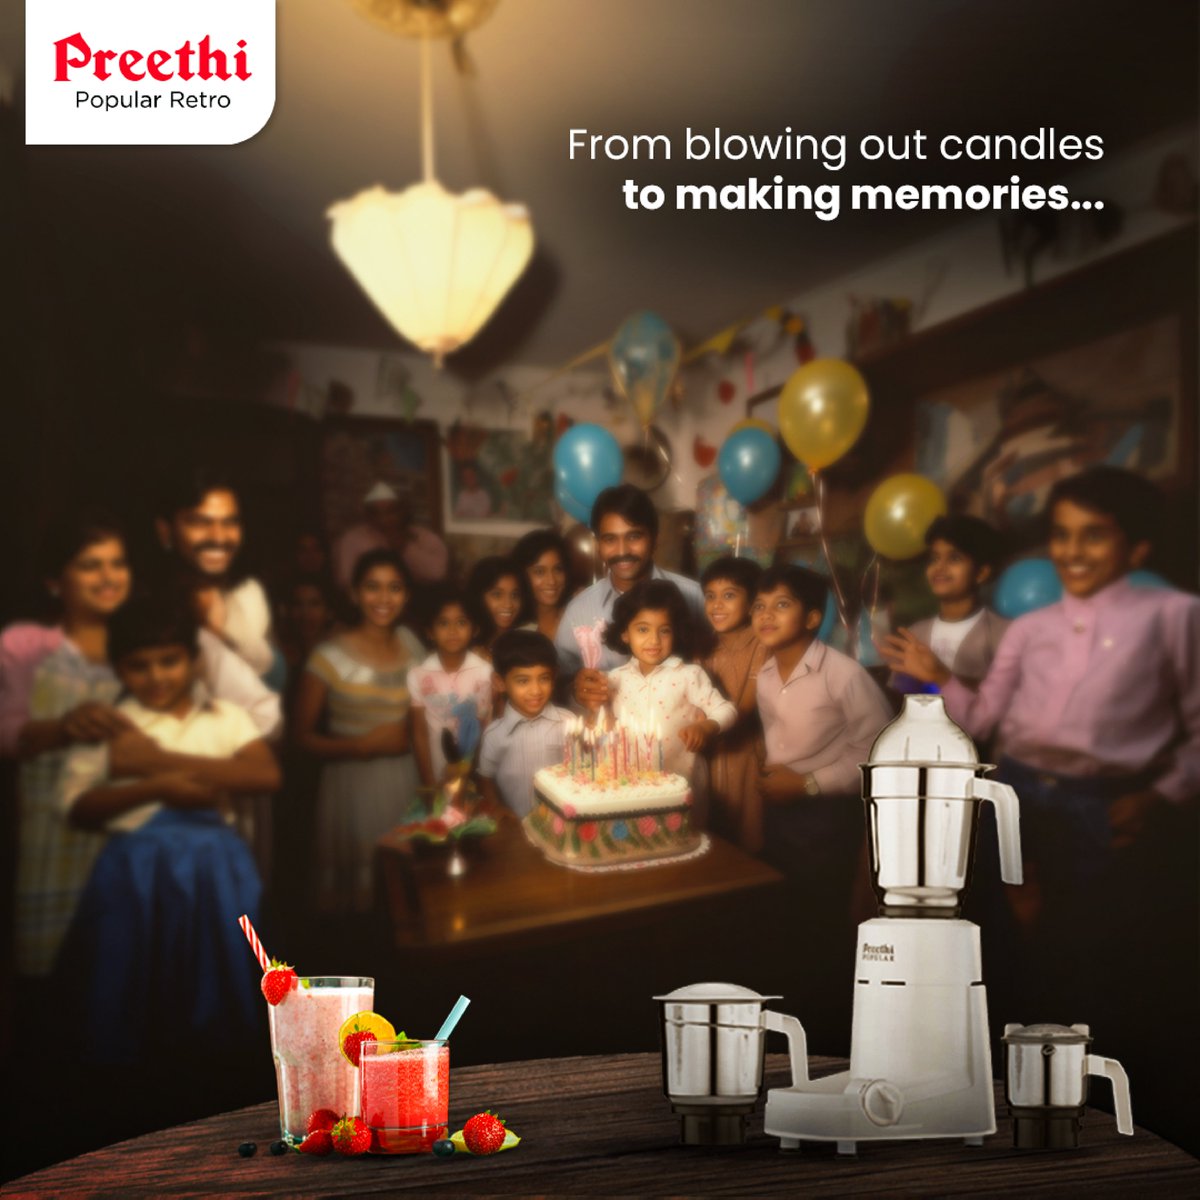 Every milestone, every meal, we have always been there ✨

#lifejourney #journeywithpreethi #mixergrinder #popularretro #preethimixergrinder #preethikitchenappliances